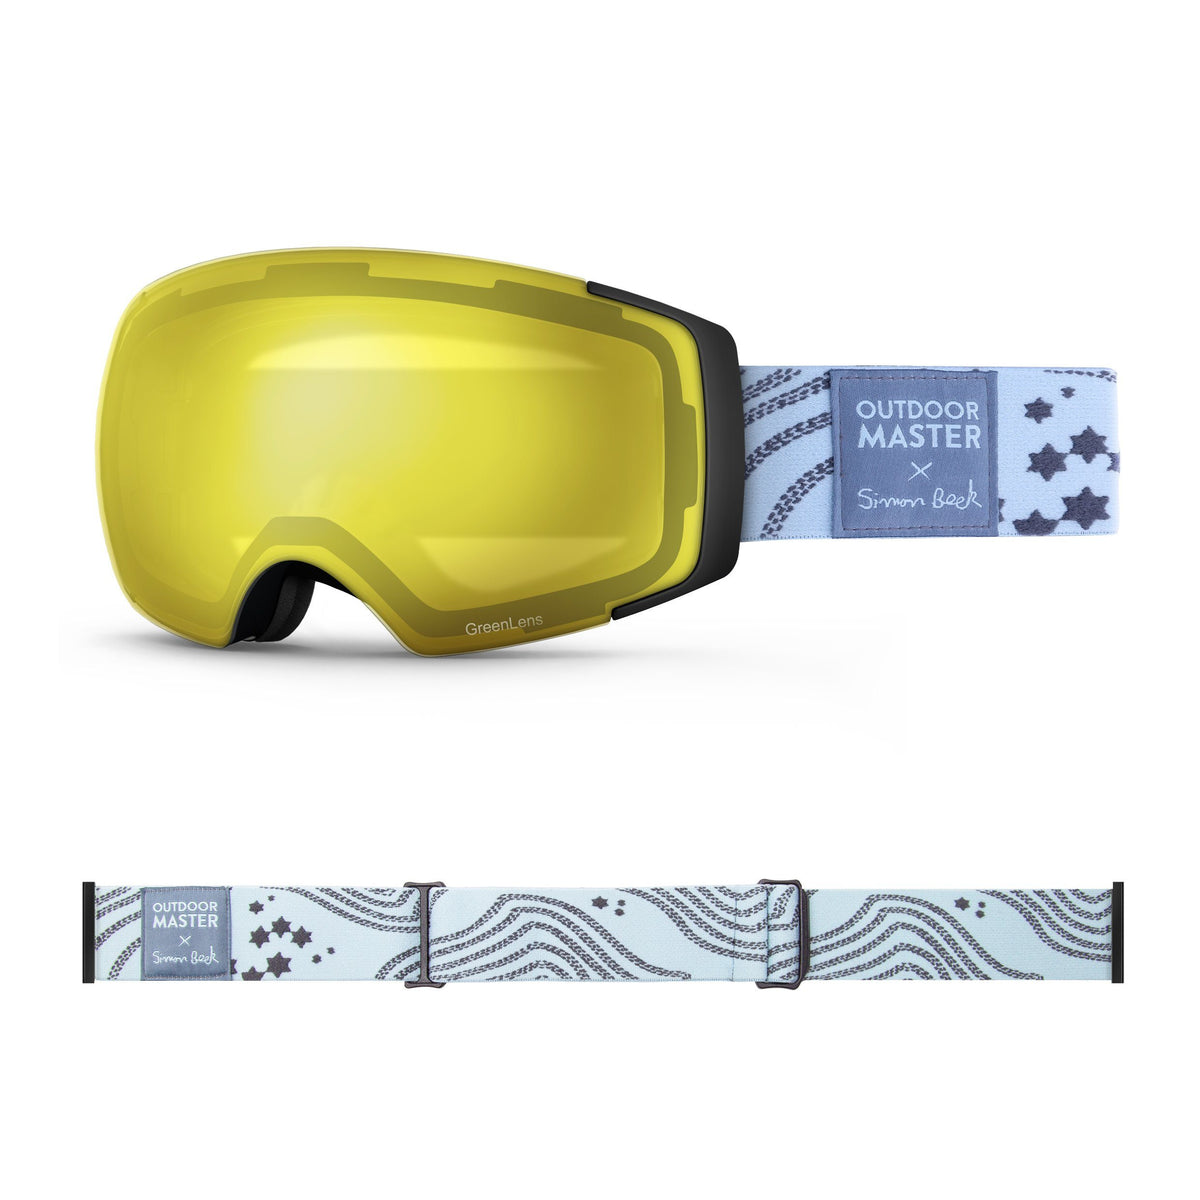 OutdoorMaster x Simon Beck Ski Goggles Pro Series - Snowshoeing Art Limited Edition OutdoorMaster GreenLens VLT 75% TAC Yellow Lens Polarized Star Road-Lightsteelblue